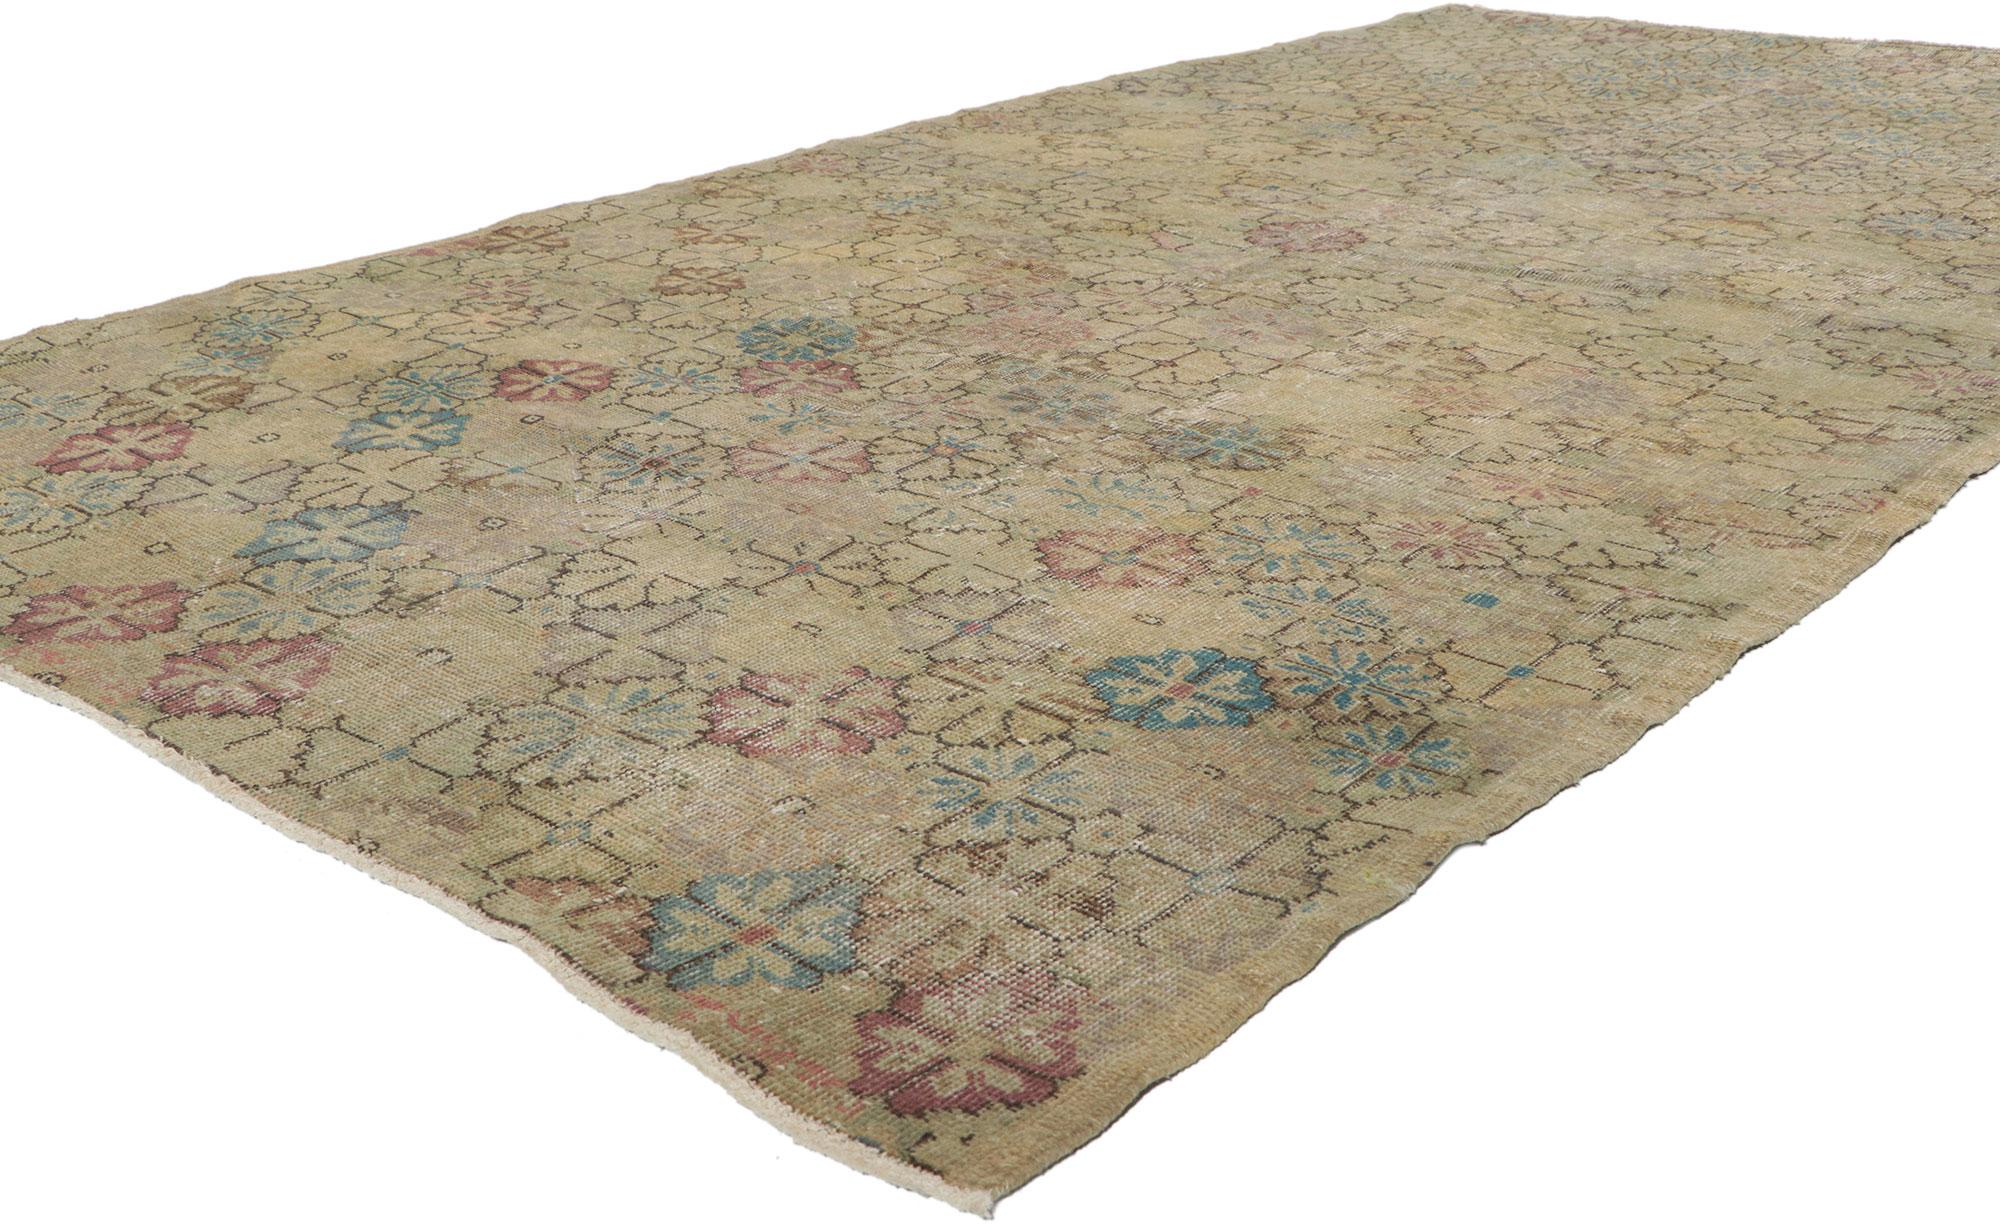 50876 Zeki Muren Distressed Vintage Turkish Sivas Rug. 
Lovingly timeworn with Gustavian grace, this hand knotted wool distressed Turkish Sivas rug beautifully embodies a Swedish Farmhouse style. The field is covered in stylized eight petal rosettes